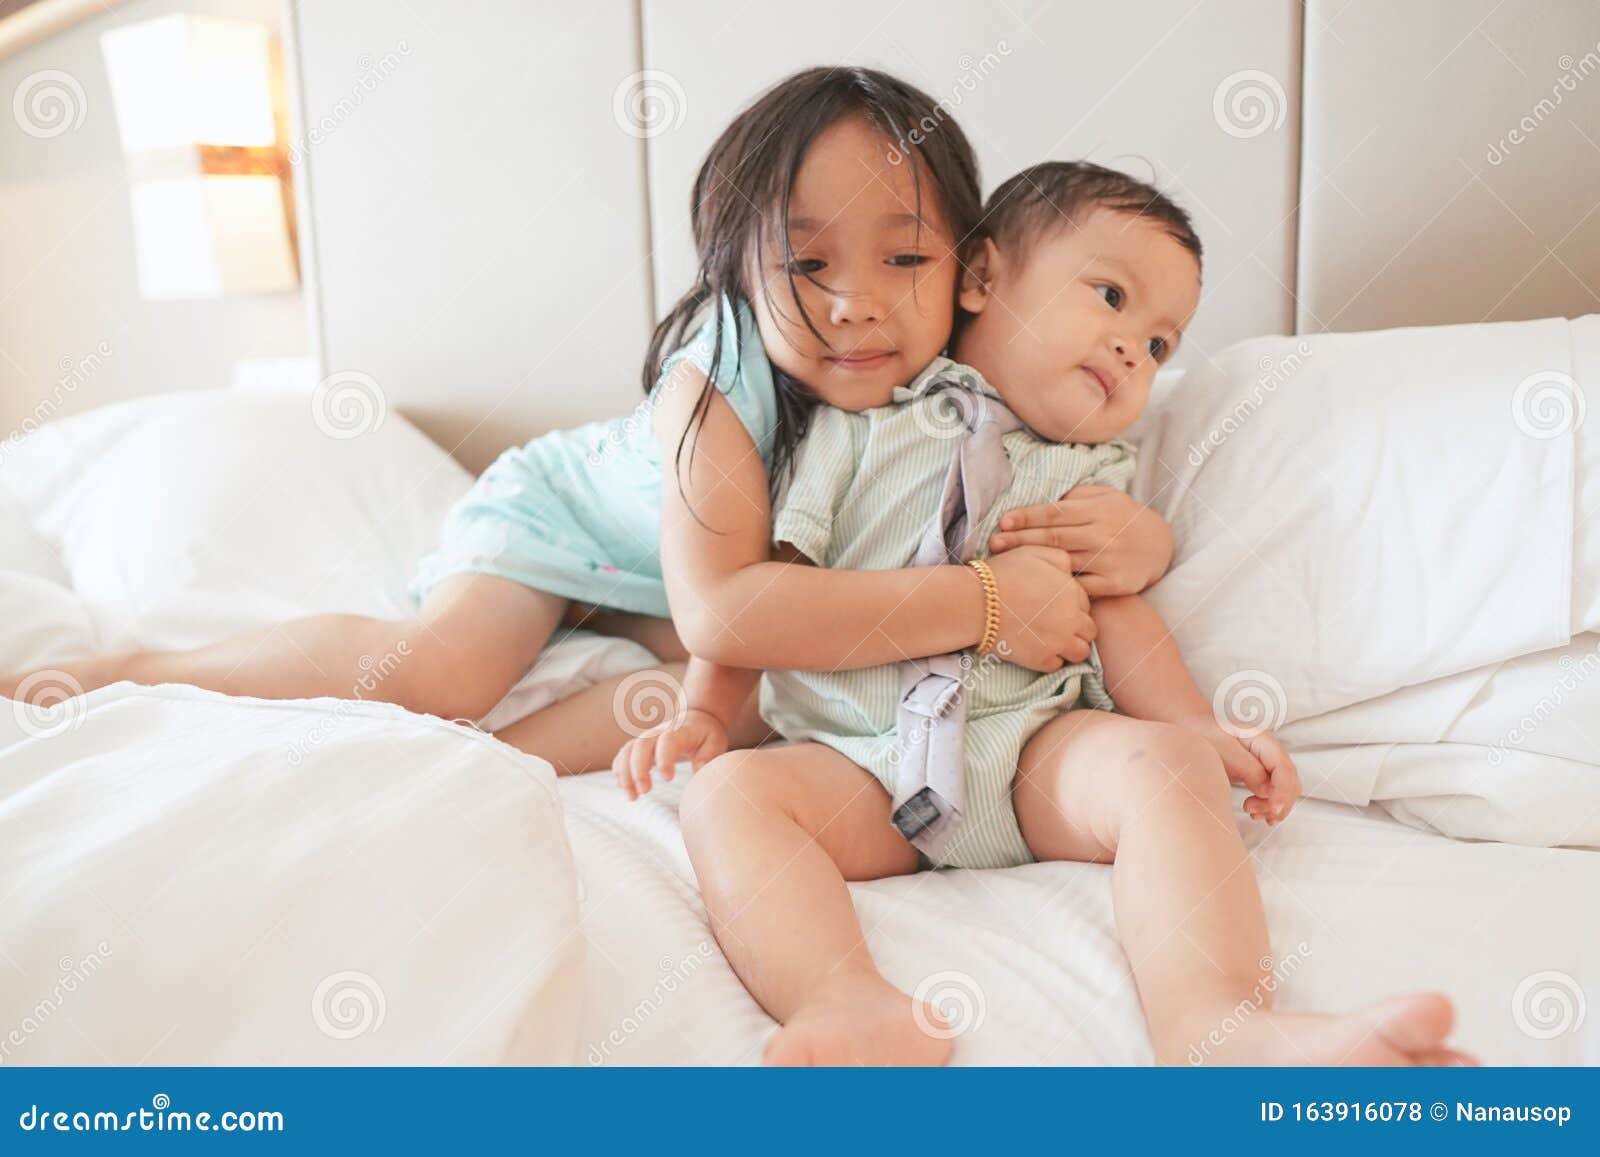 Asian Siblings on a White Bed Stock Photo - Image of moment, neckties ...